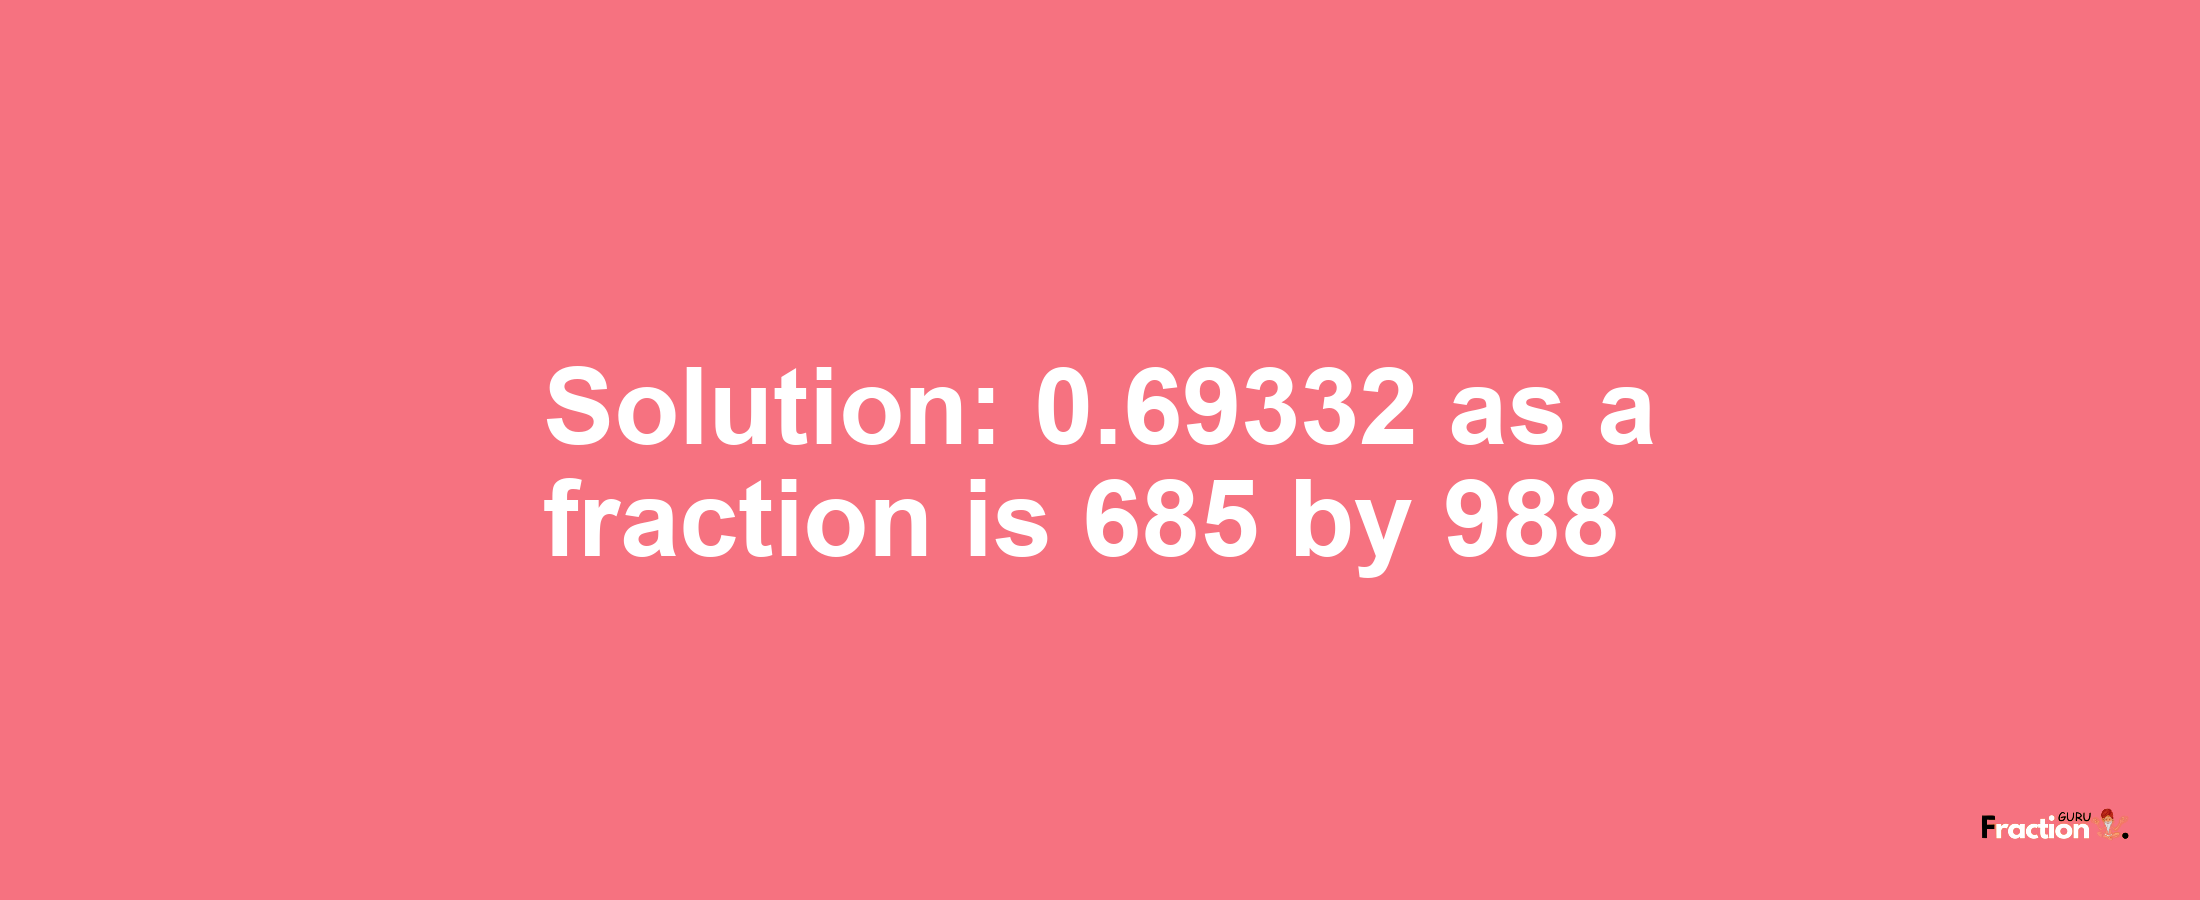 Solution:0.69332 as a fraction is 685/988